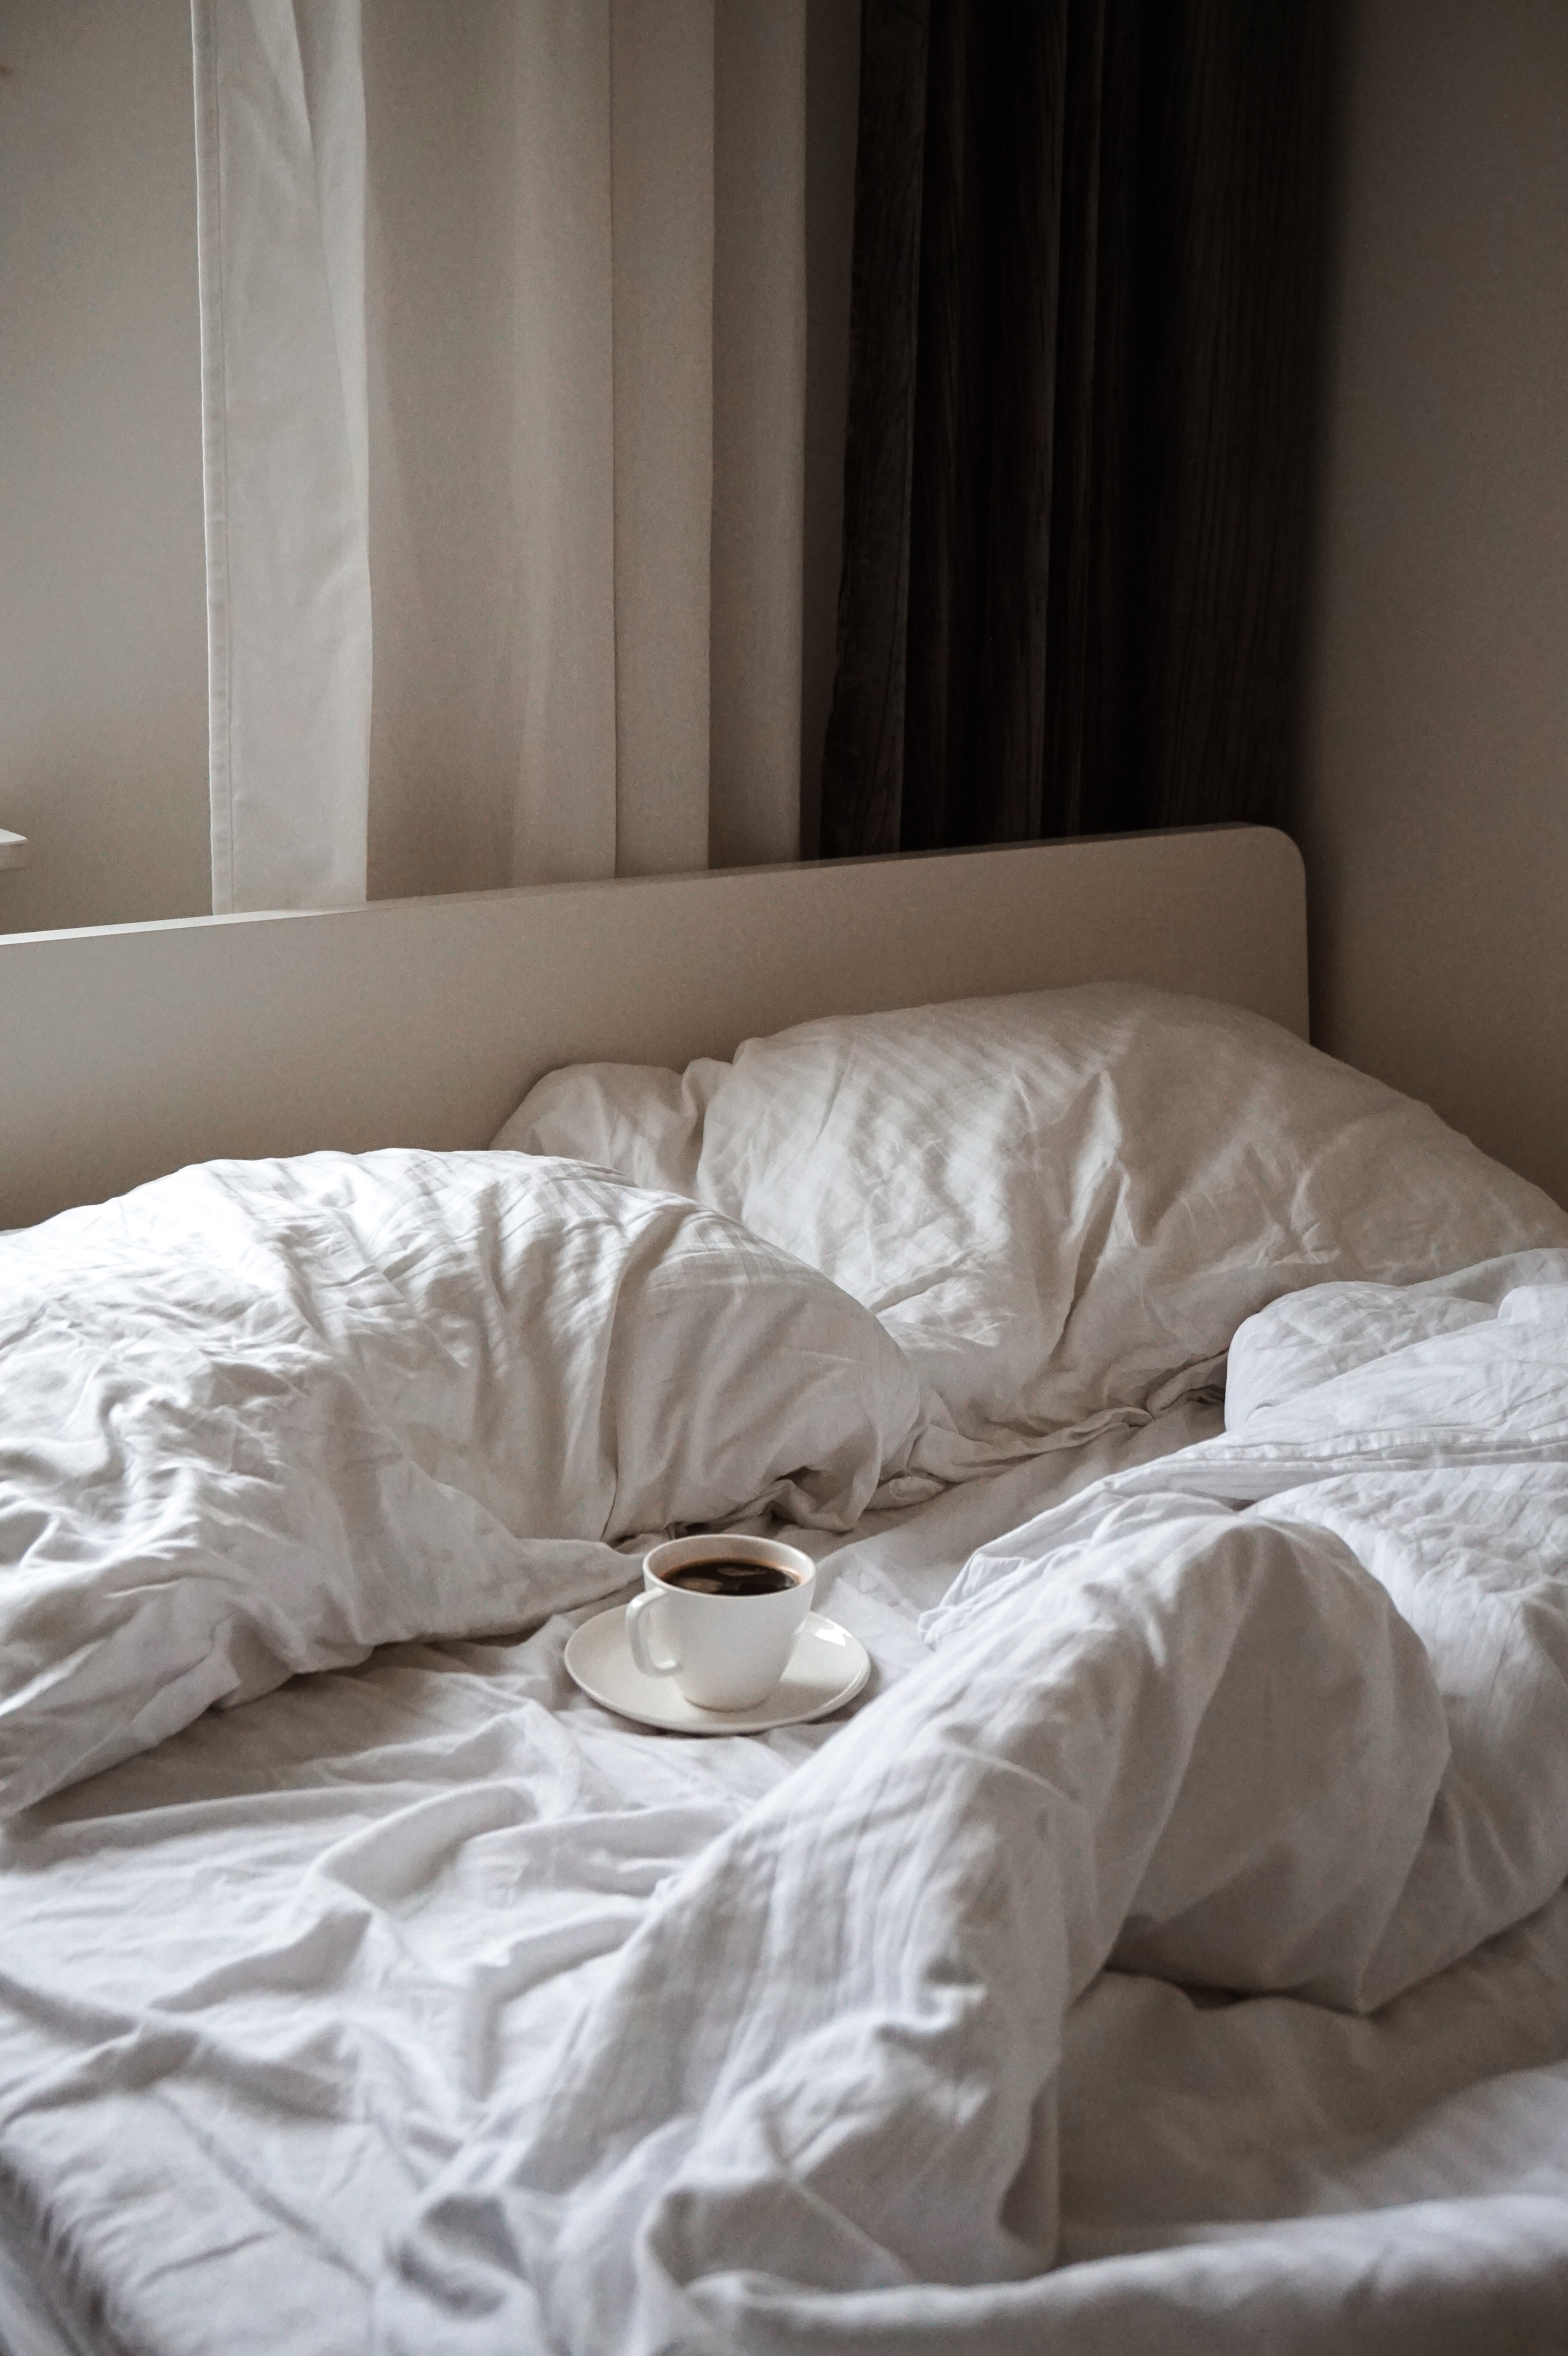 Mobile wallpaper coffee, white, miscellanea, miscellaneous, cup, bed, cushions, pillows